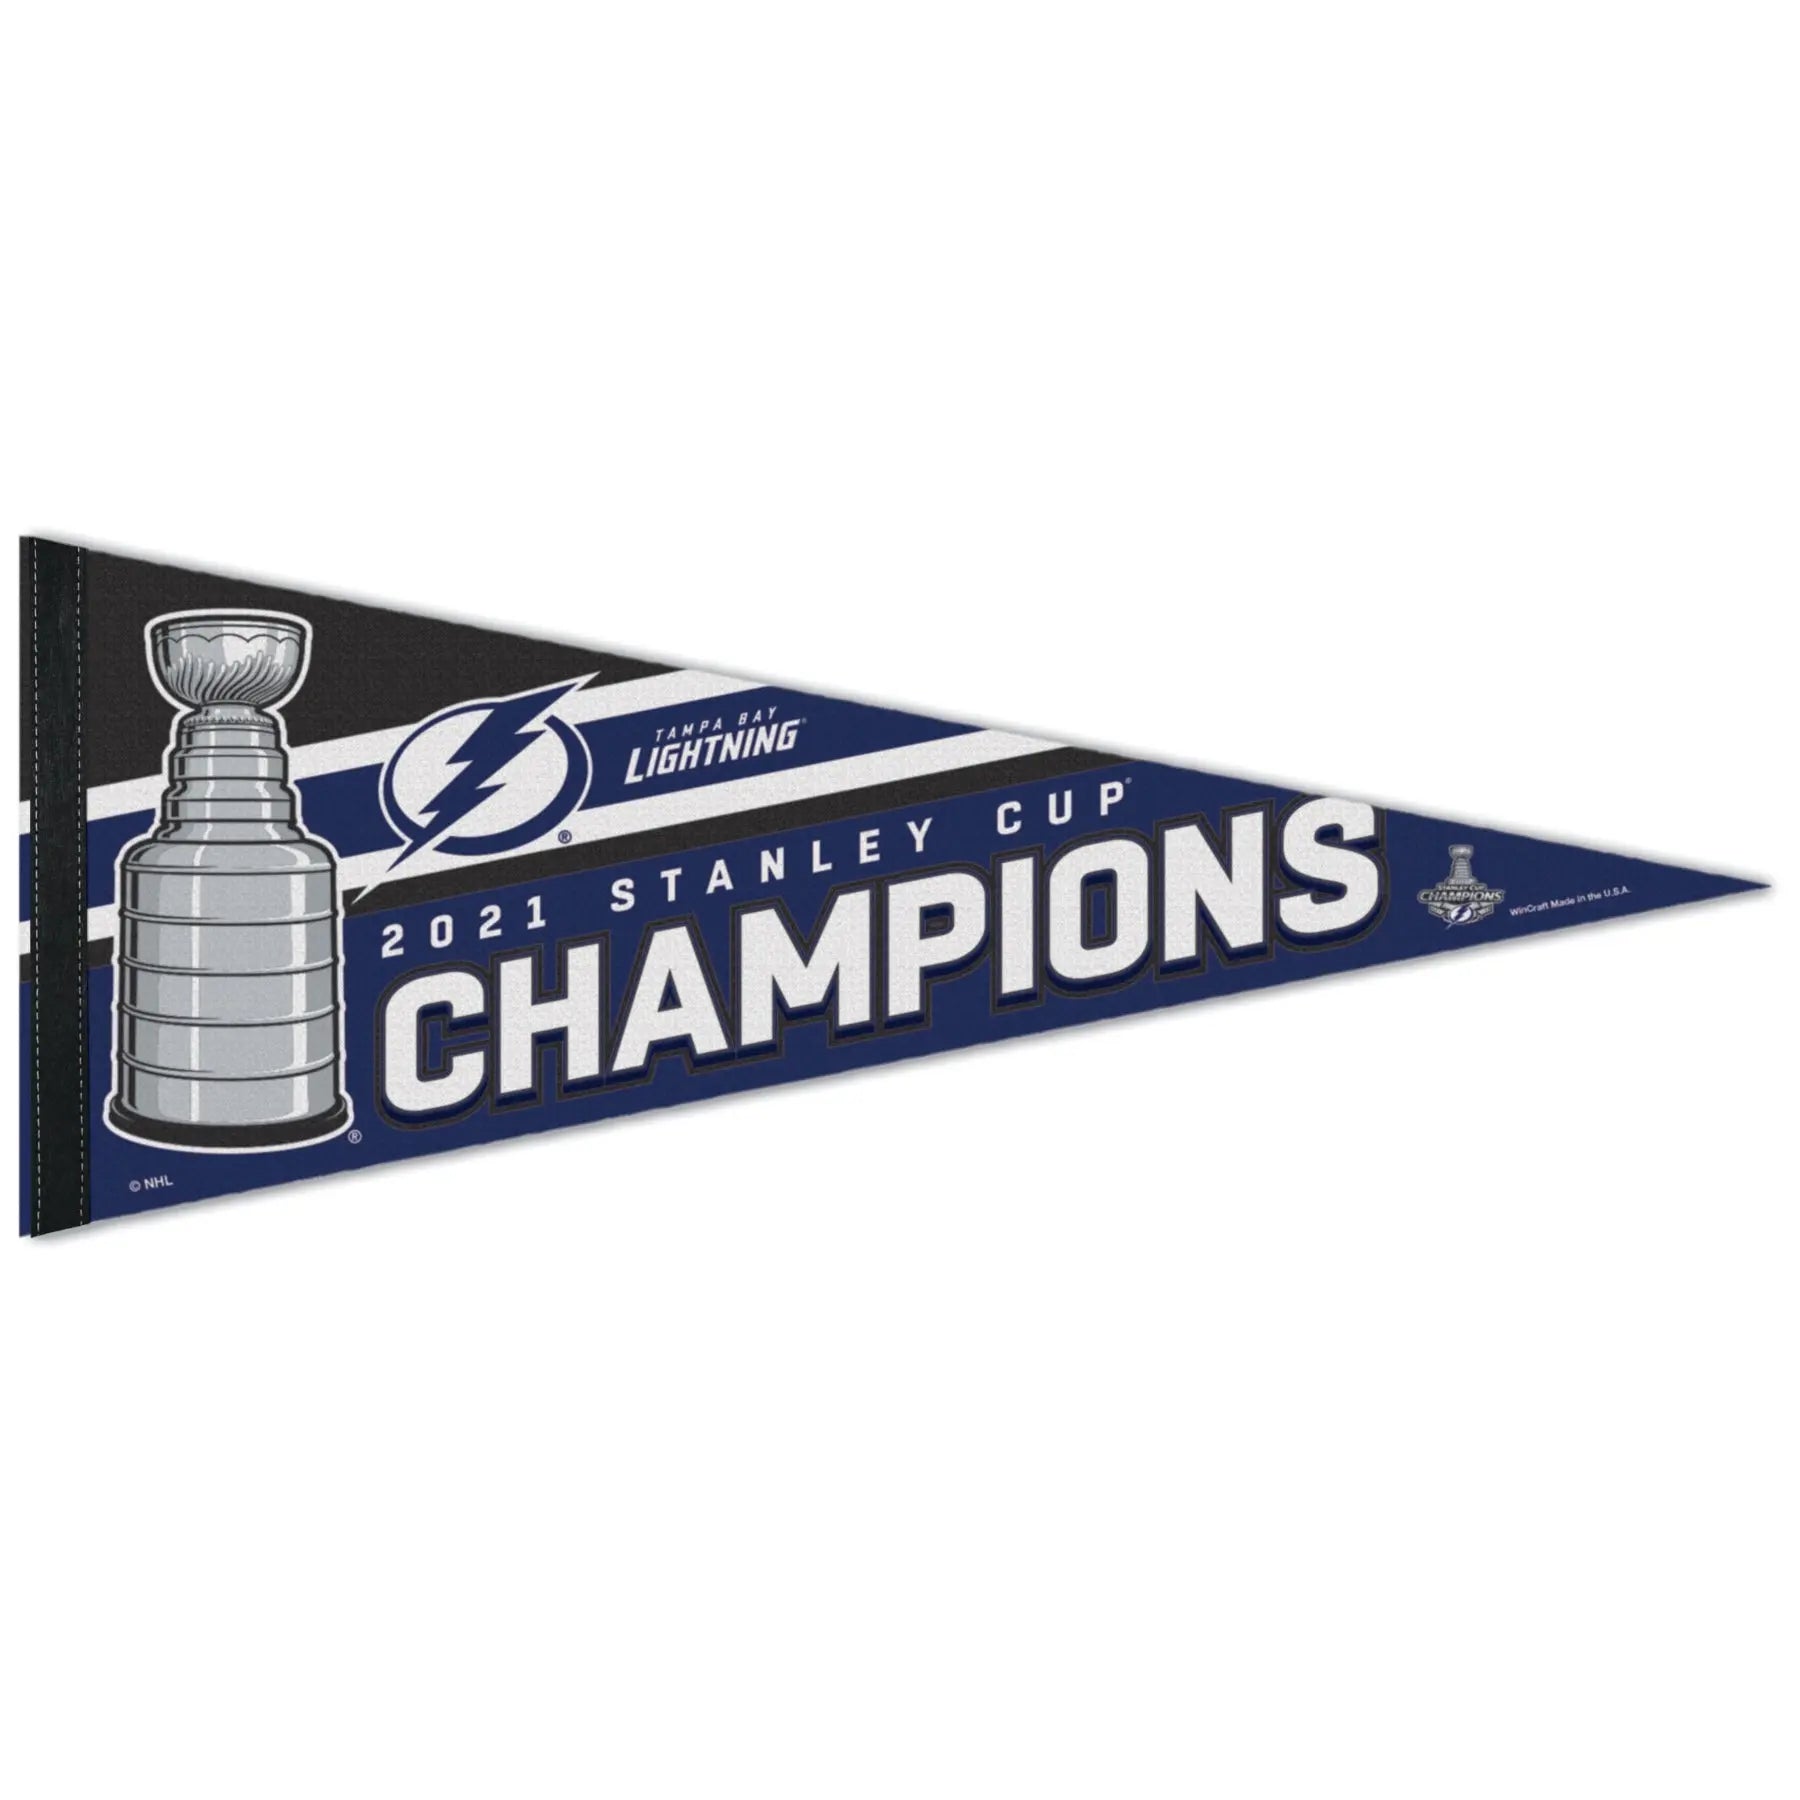 Mickey Mouse St. Louis Blues Stanley cup Champions t-shirt by To